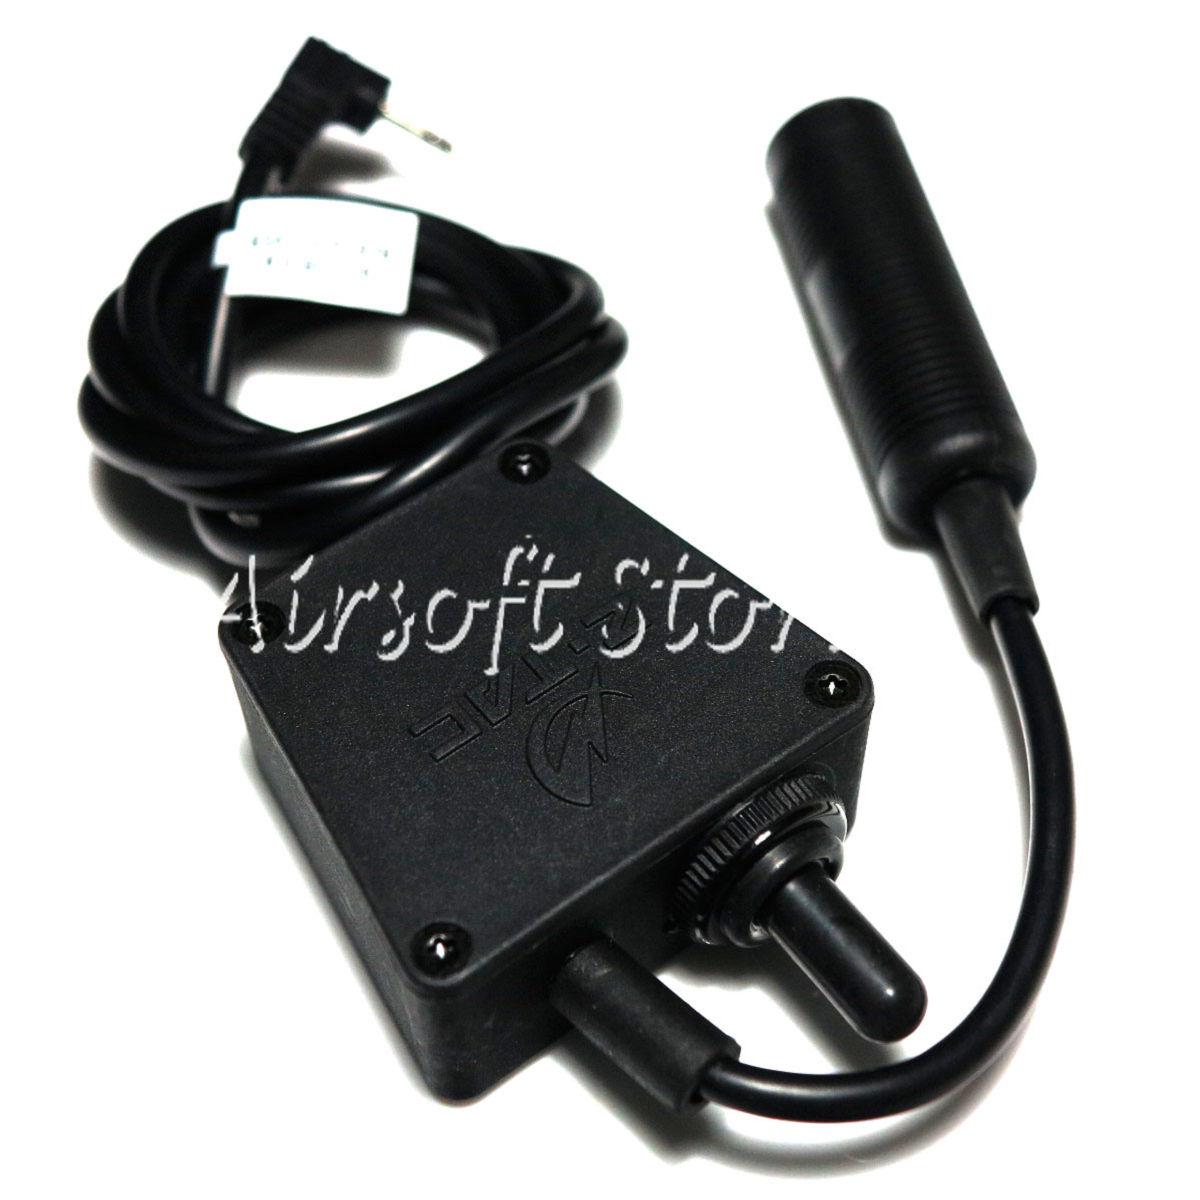 Airsoft SWAT Communications Gear Z Tactical E-Switch Headset PTT for Motorola Talkabout Radio